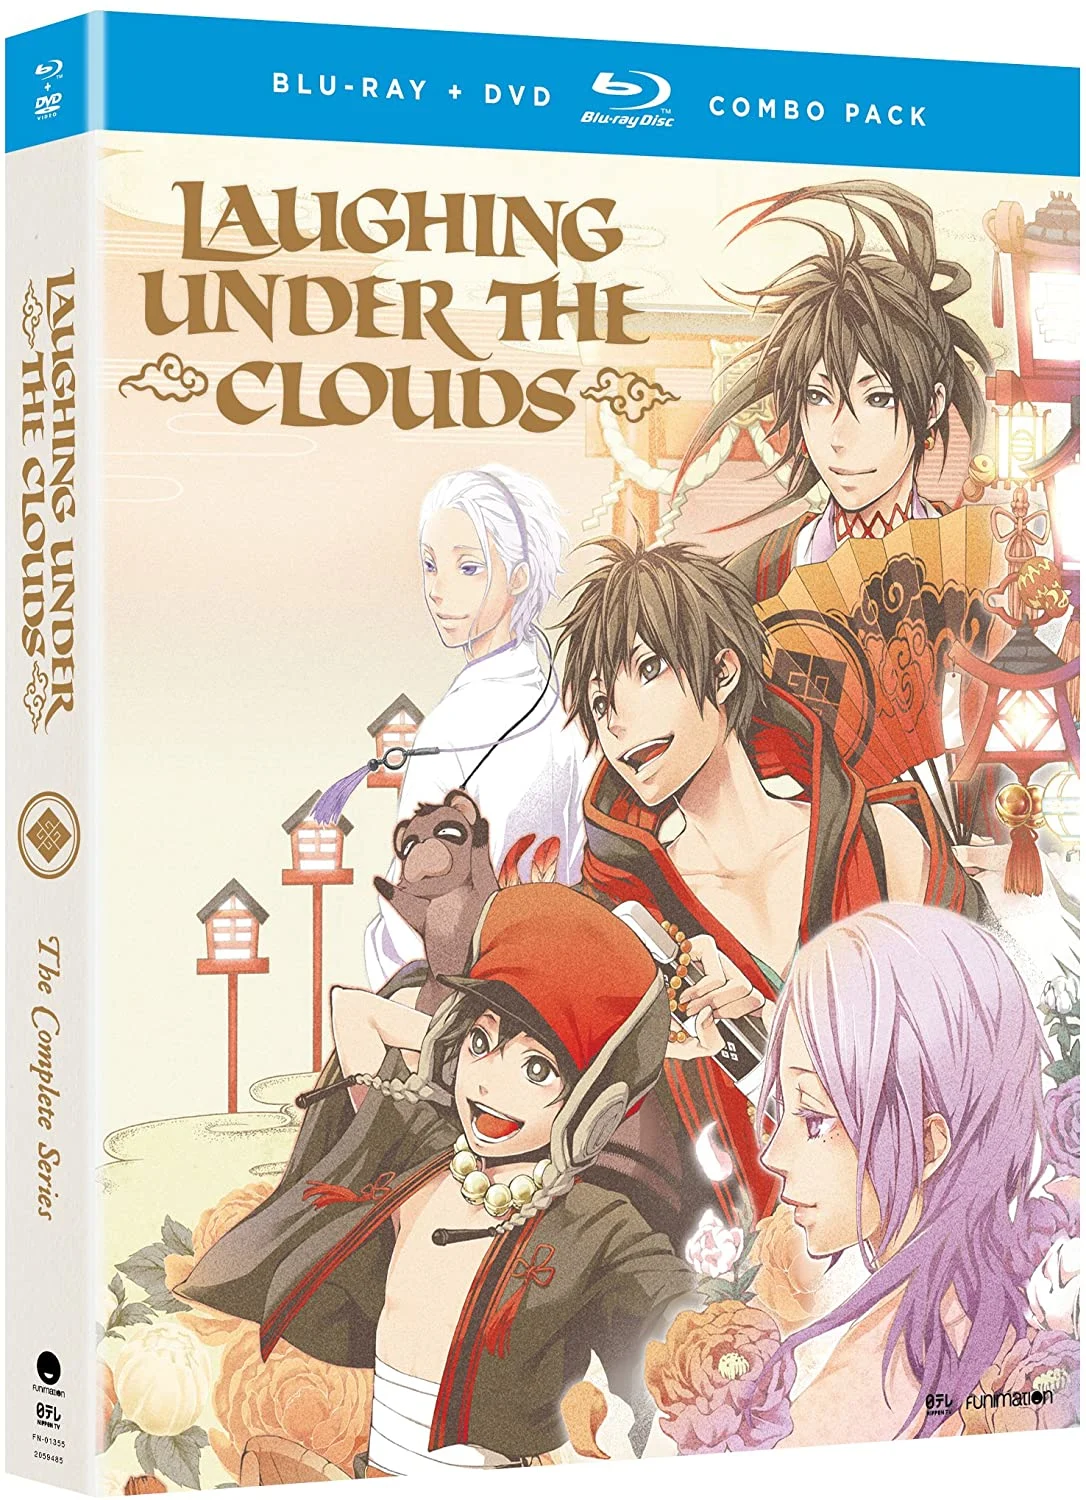 Laughing Under the Clouds: The Complete Series (Blu-ray/DVD Combo)